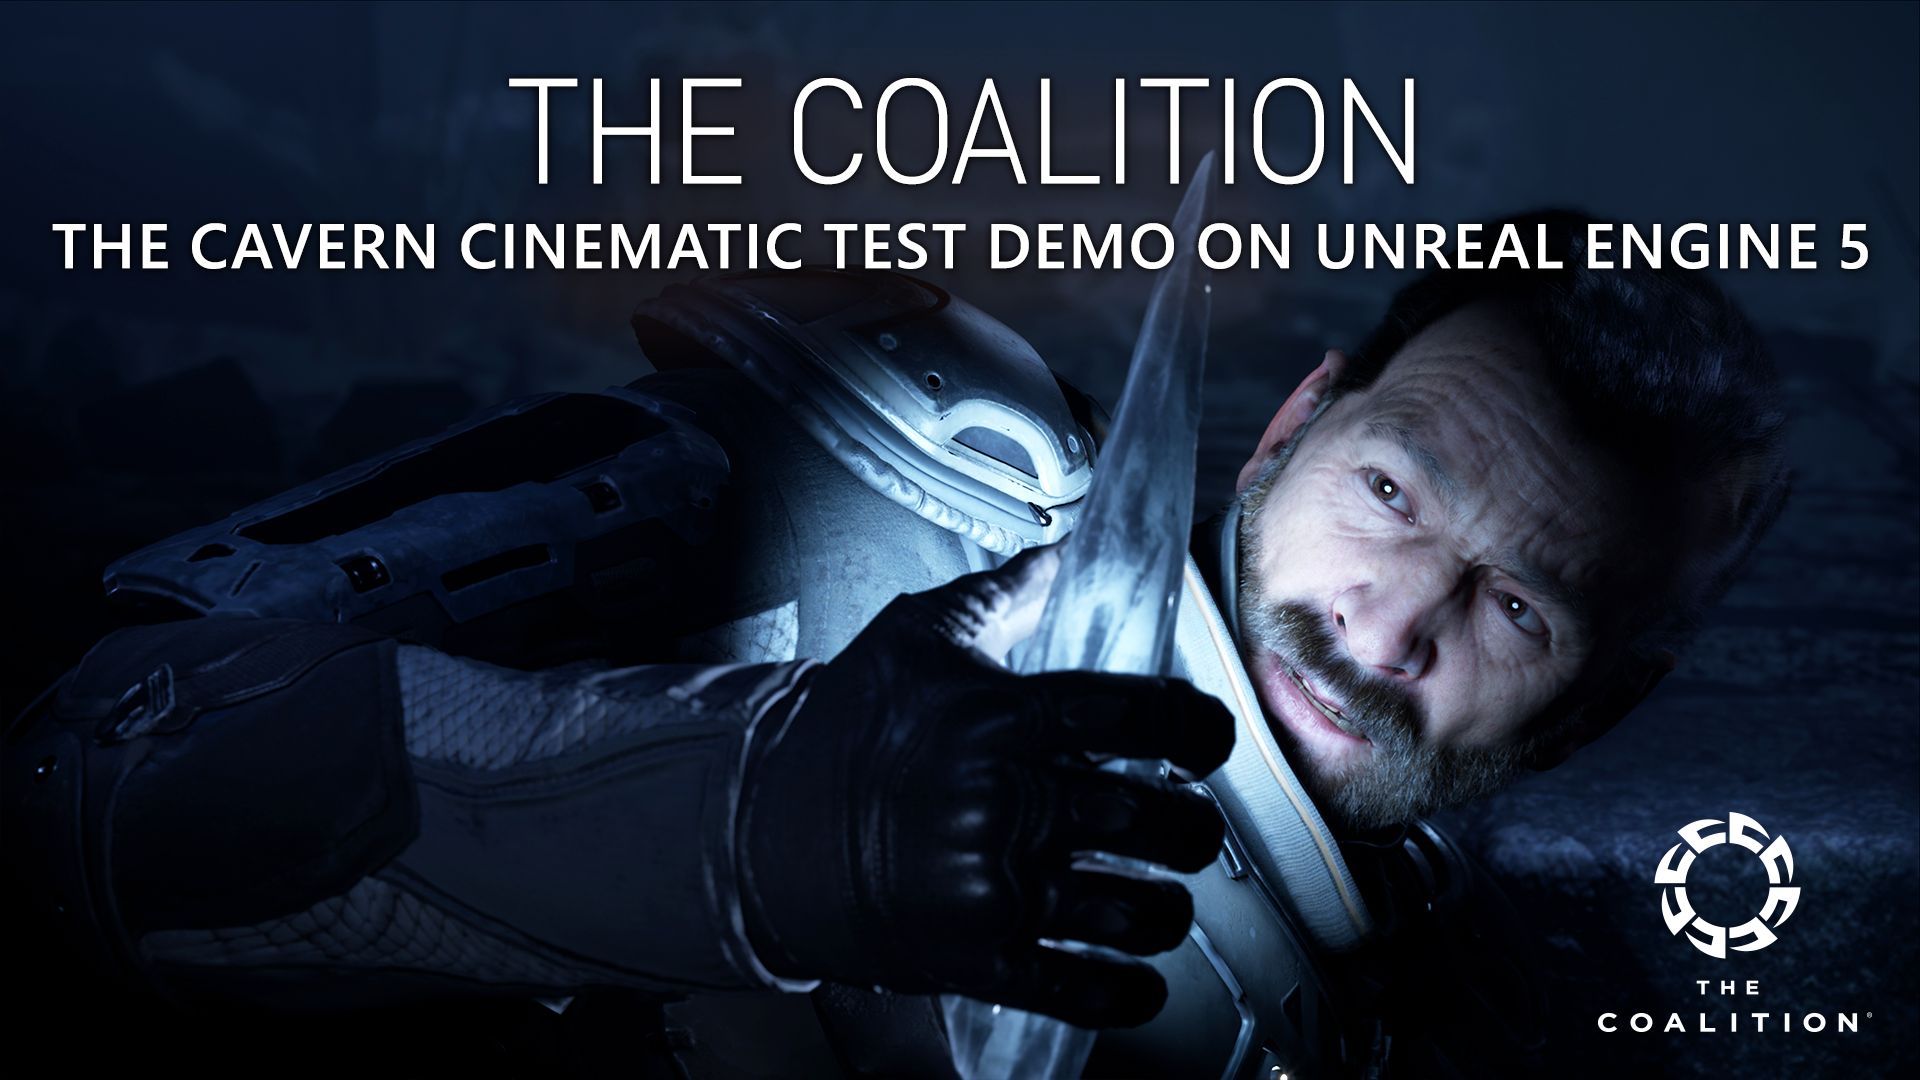 Video For The Coalition Debuts New Unreal Engine 5 Tech Test with 100x More Graphic Detail 